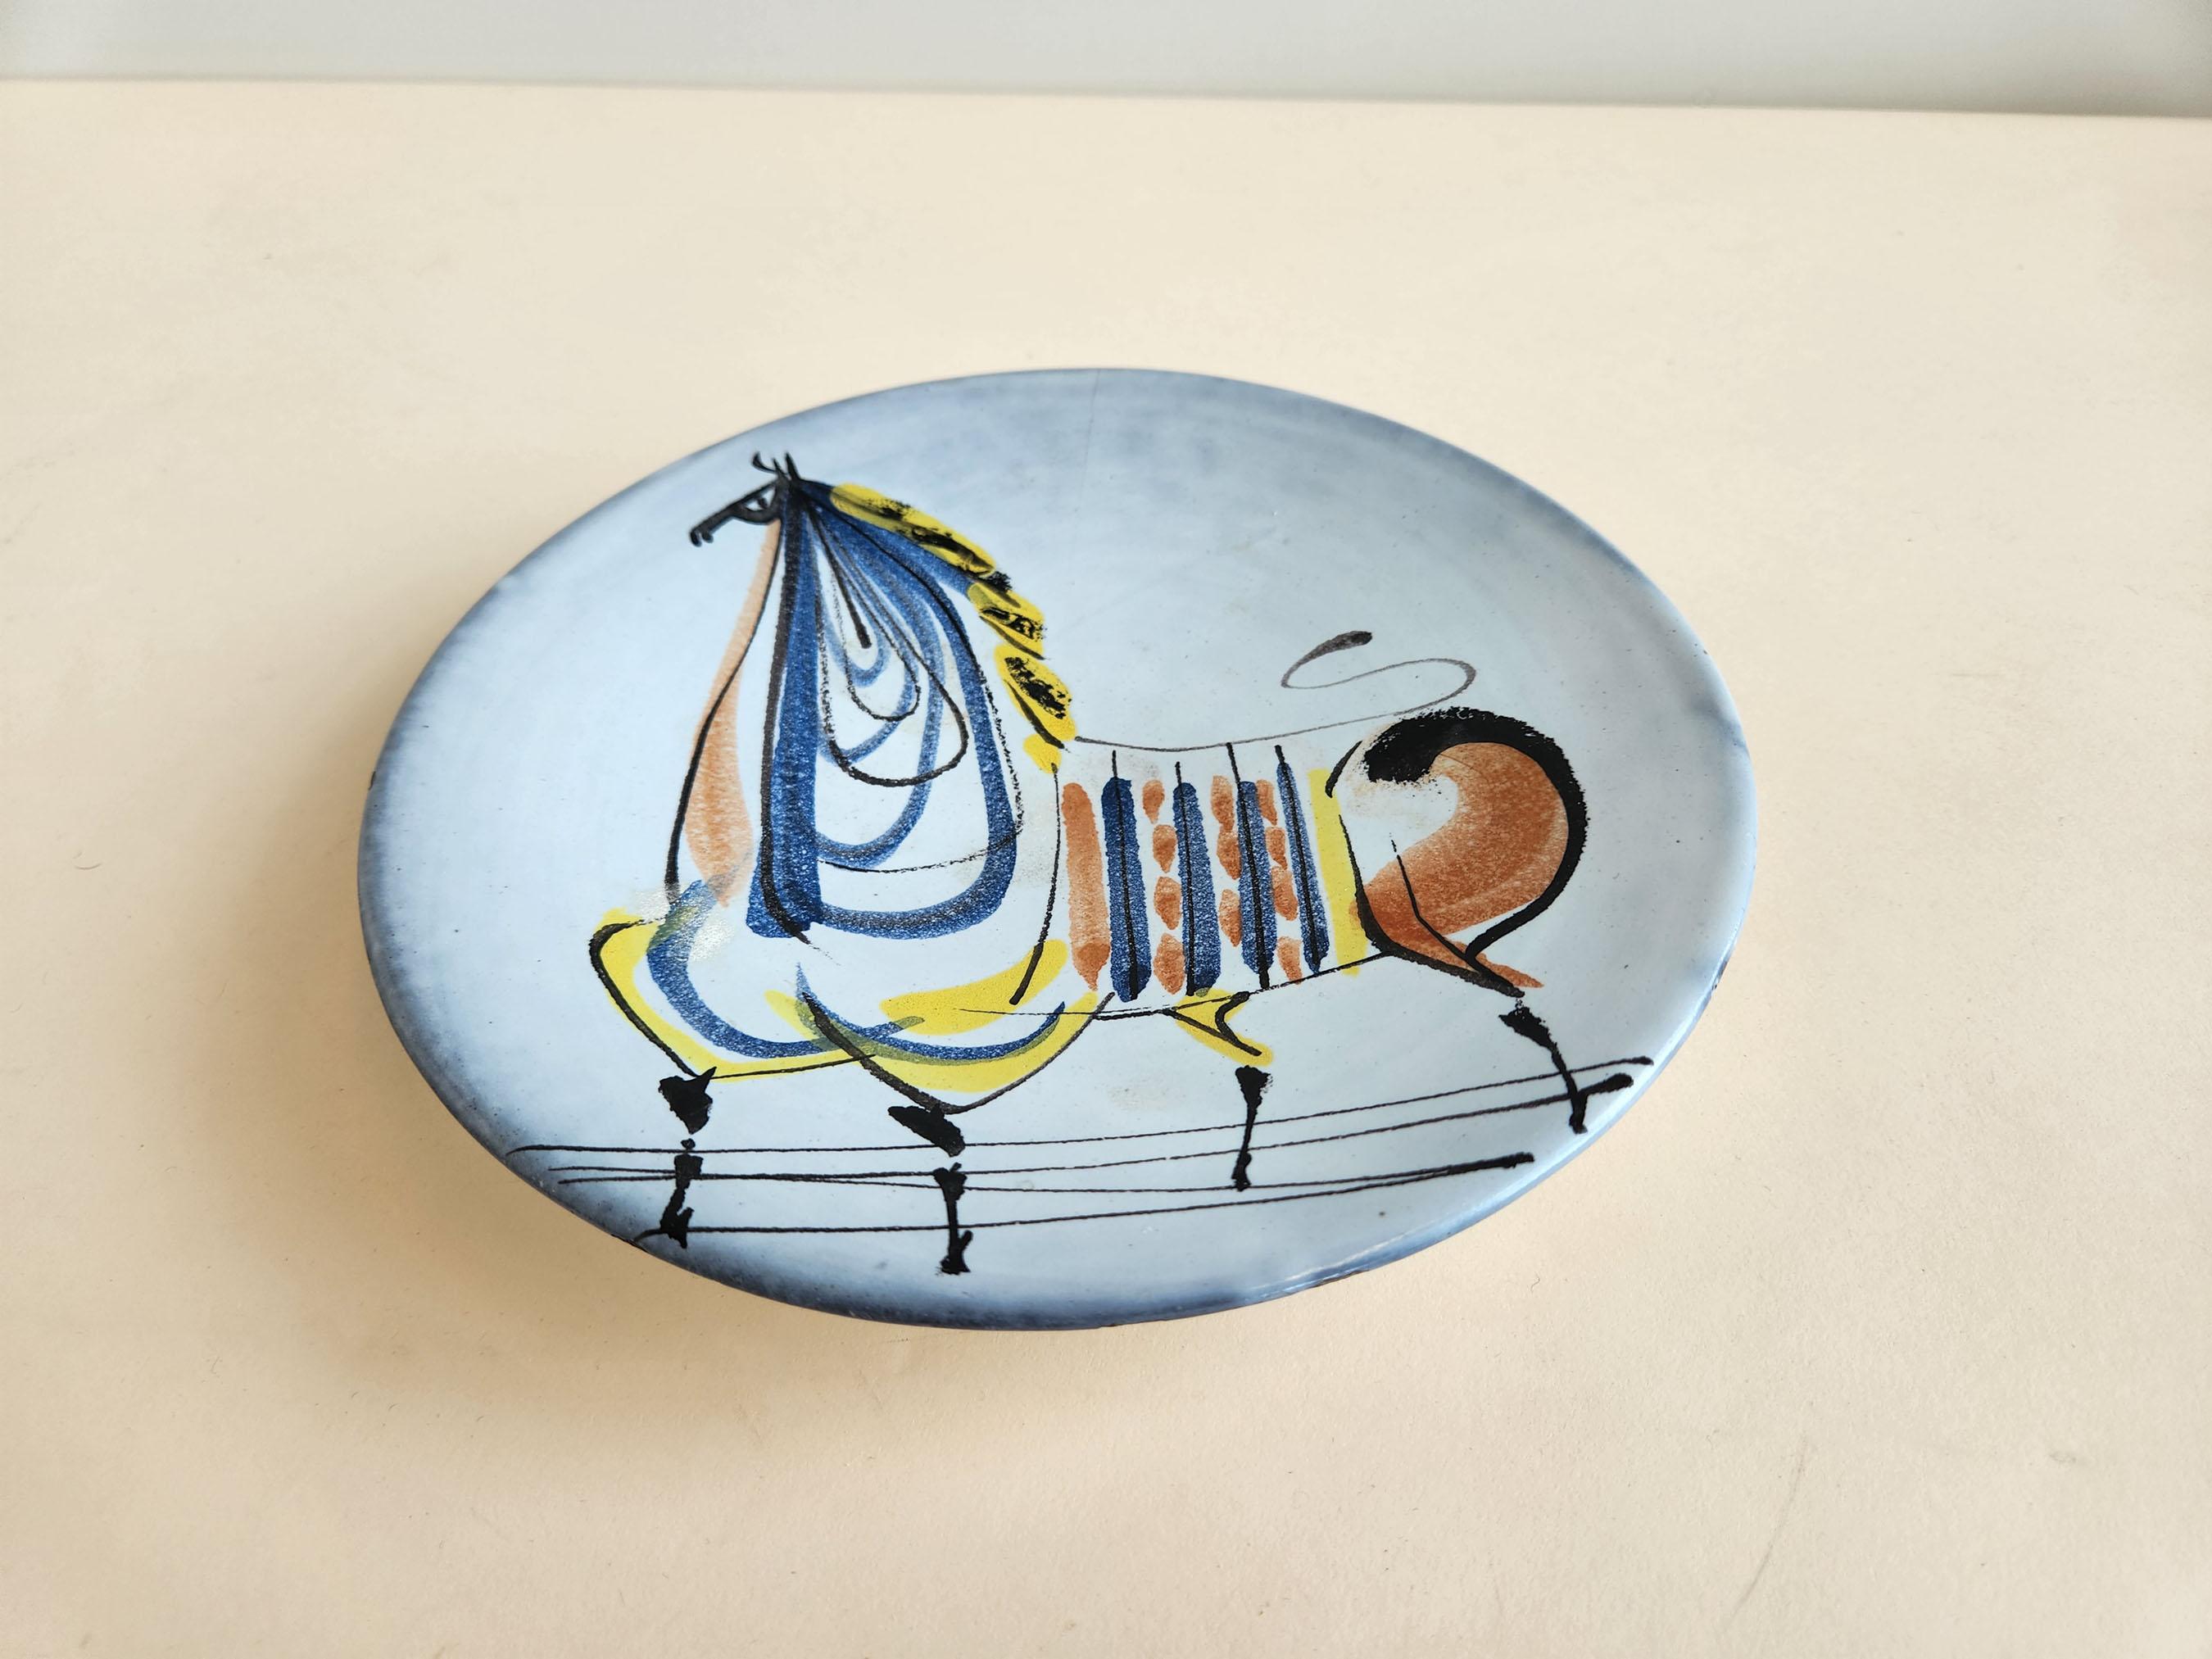 Vintage Ceramic Plate with Horse by Roger Capron  -  Vallauris, France

Roger Capron was in influential French ceramicist, known for his tiled tables and his use of recurring motifs such as stylized branches and geometrical suns.   He was born in